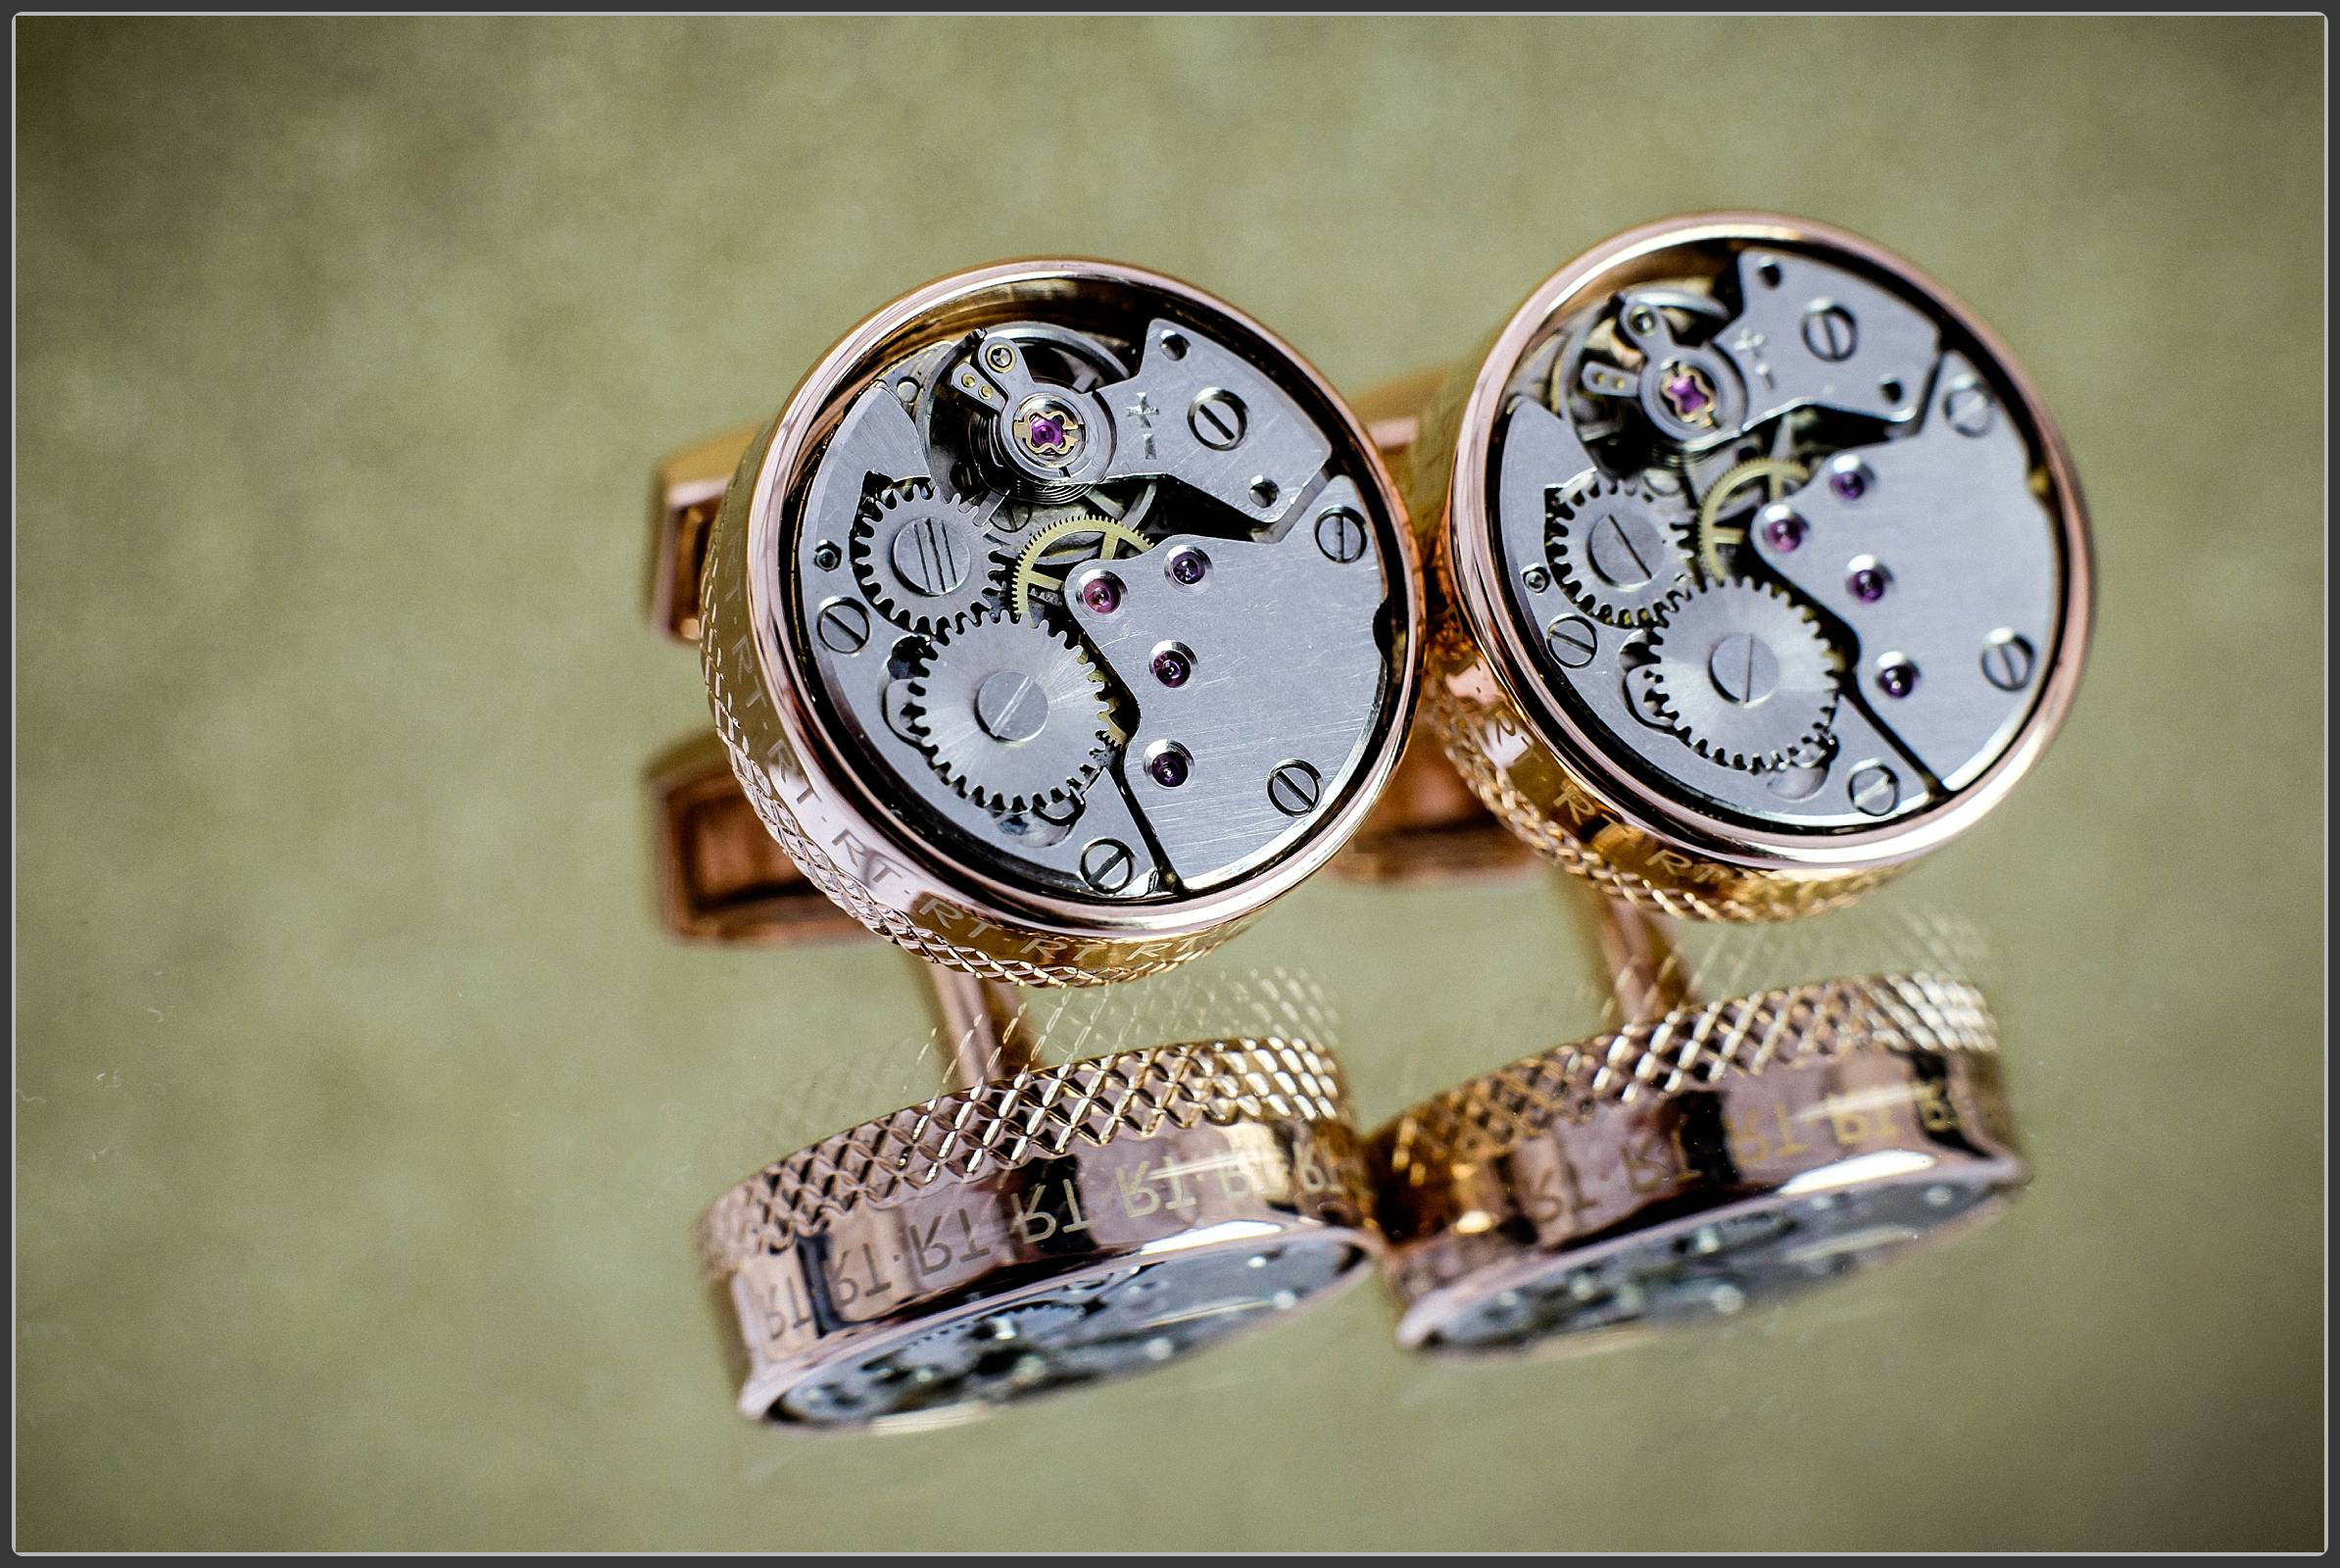 The grooms cuff links